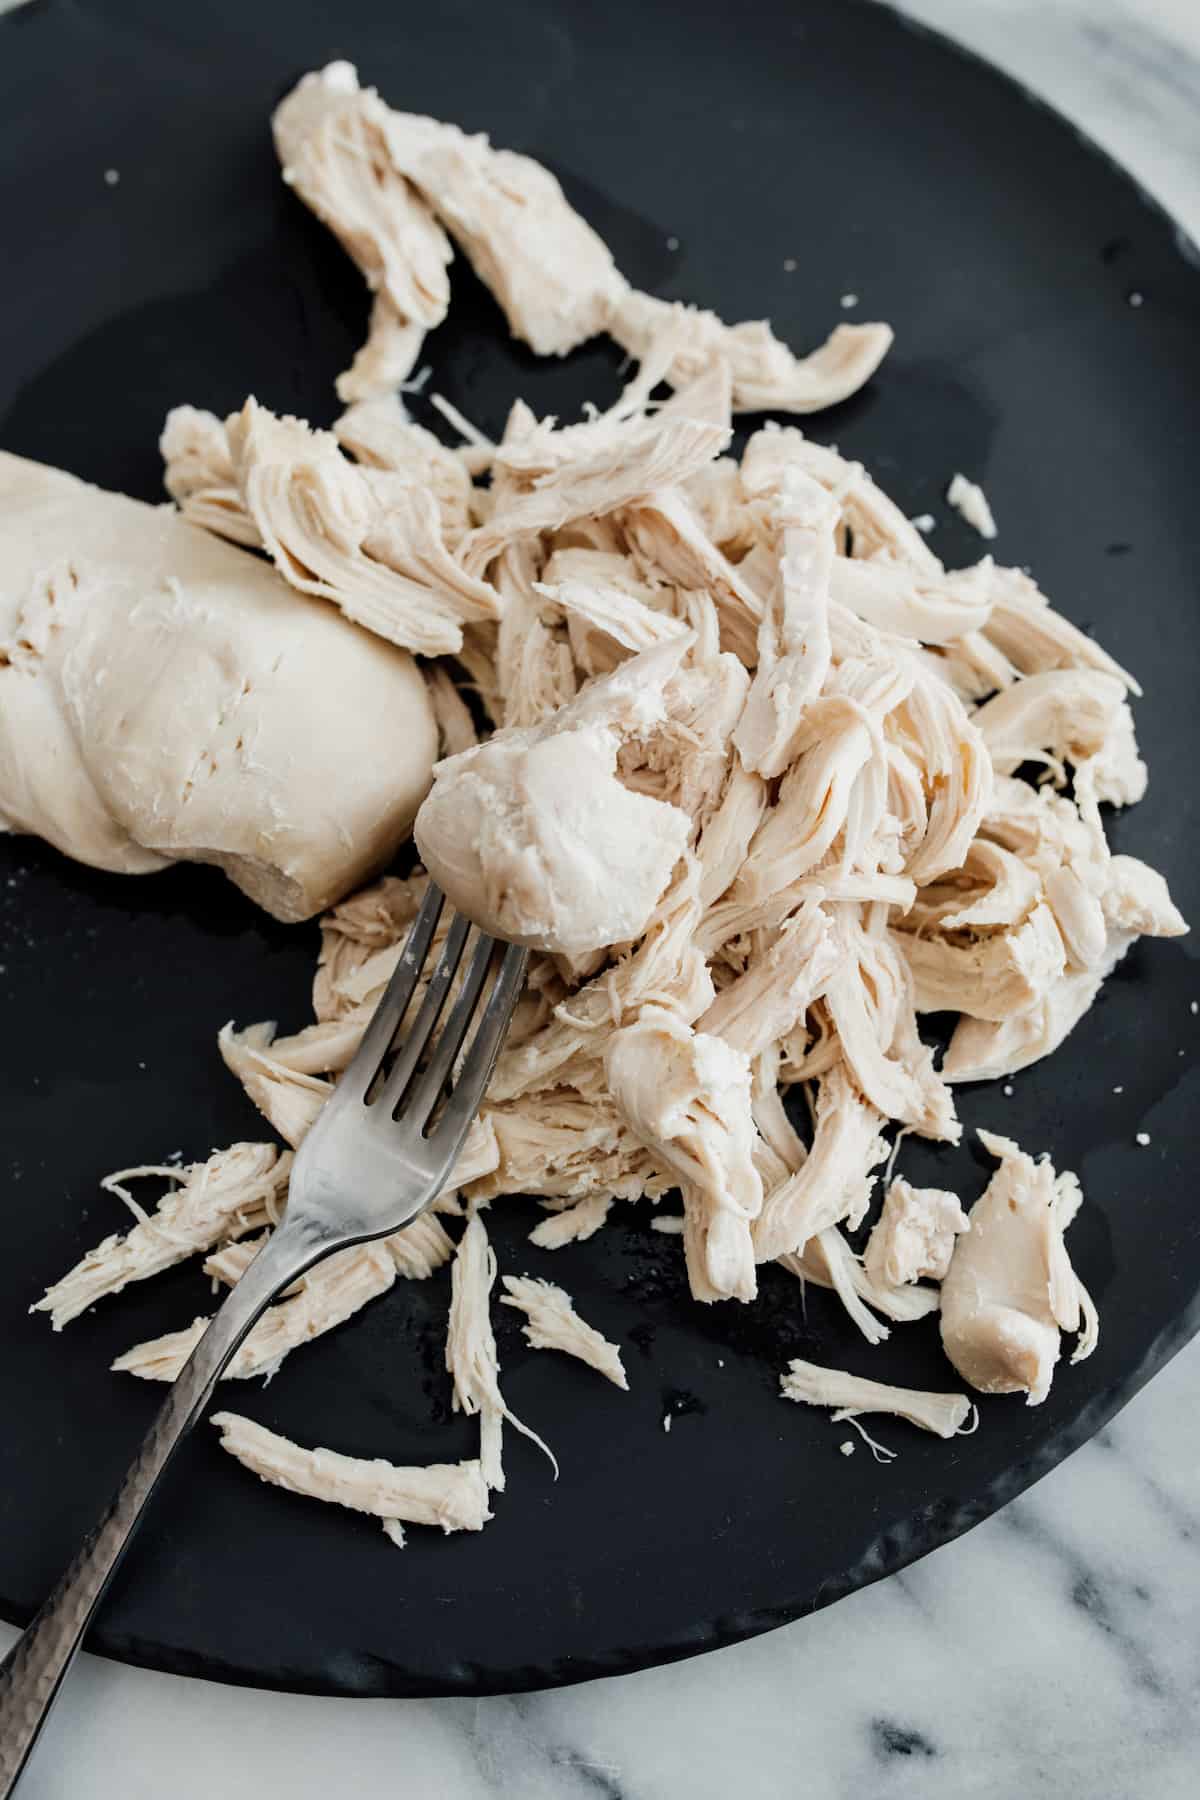 shredding chicken breasts with a fork.